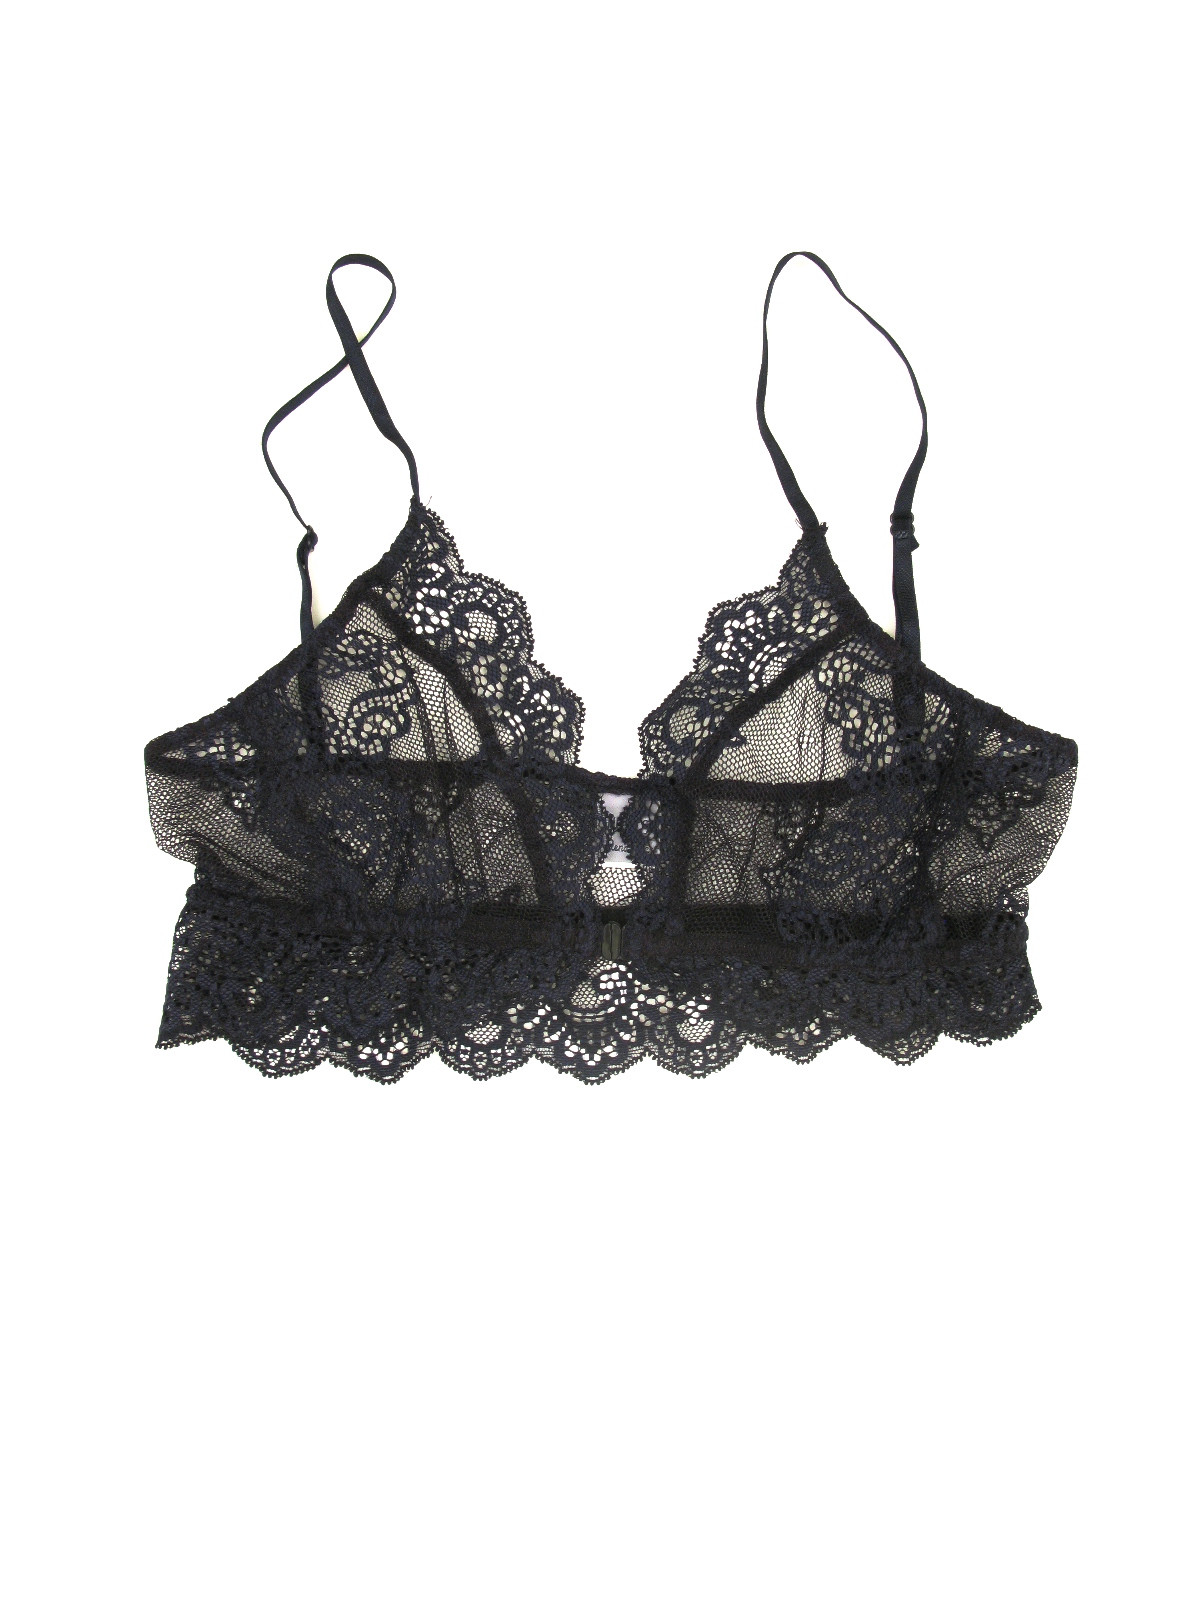 So Fine All-lace Bralette by Only Hearts, цена $44 вместо $55, все размеры